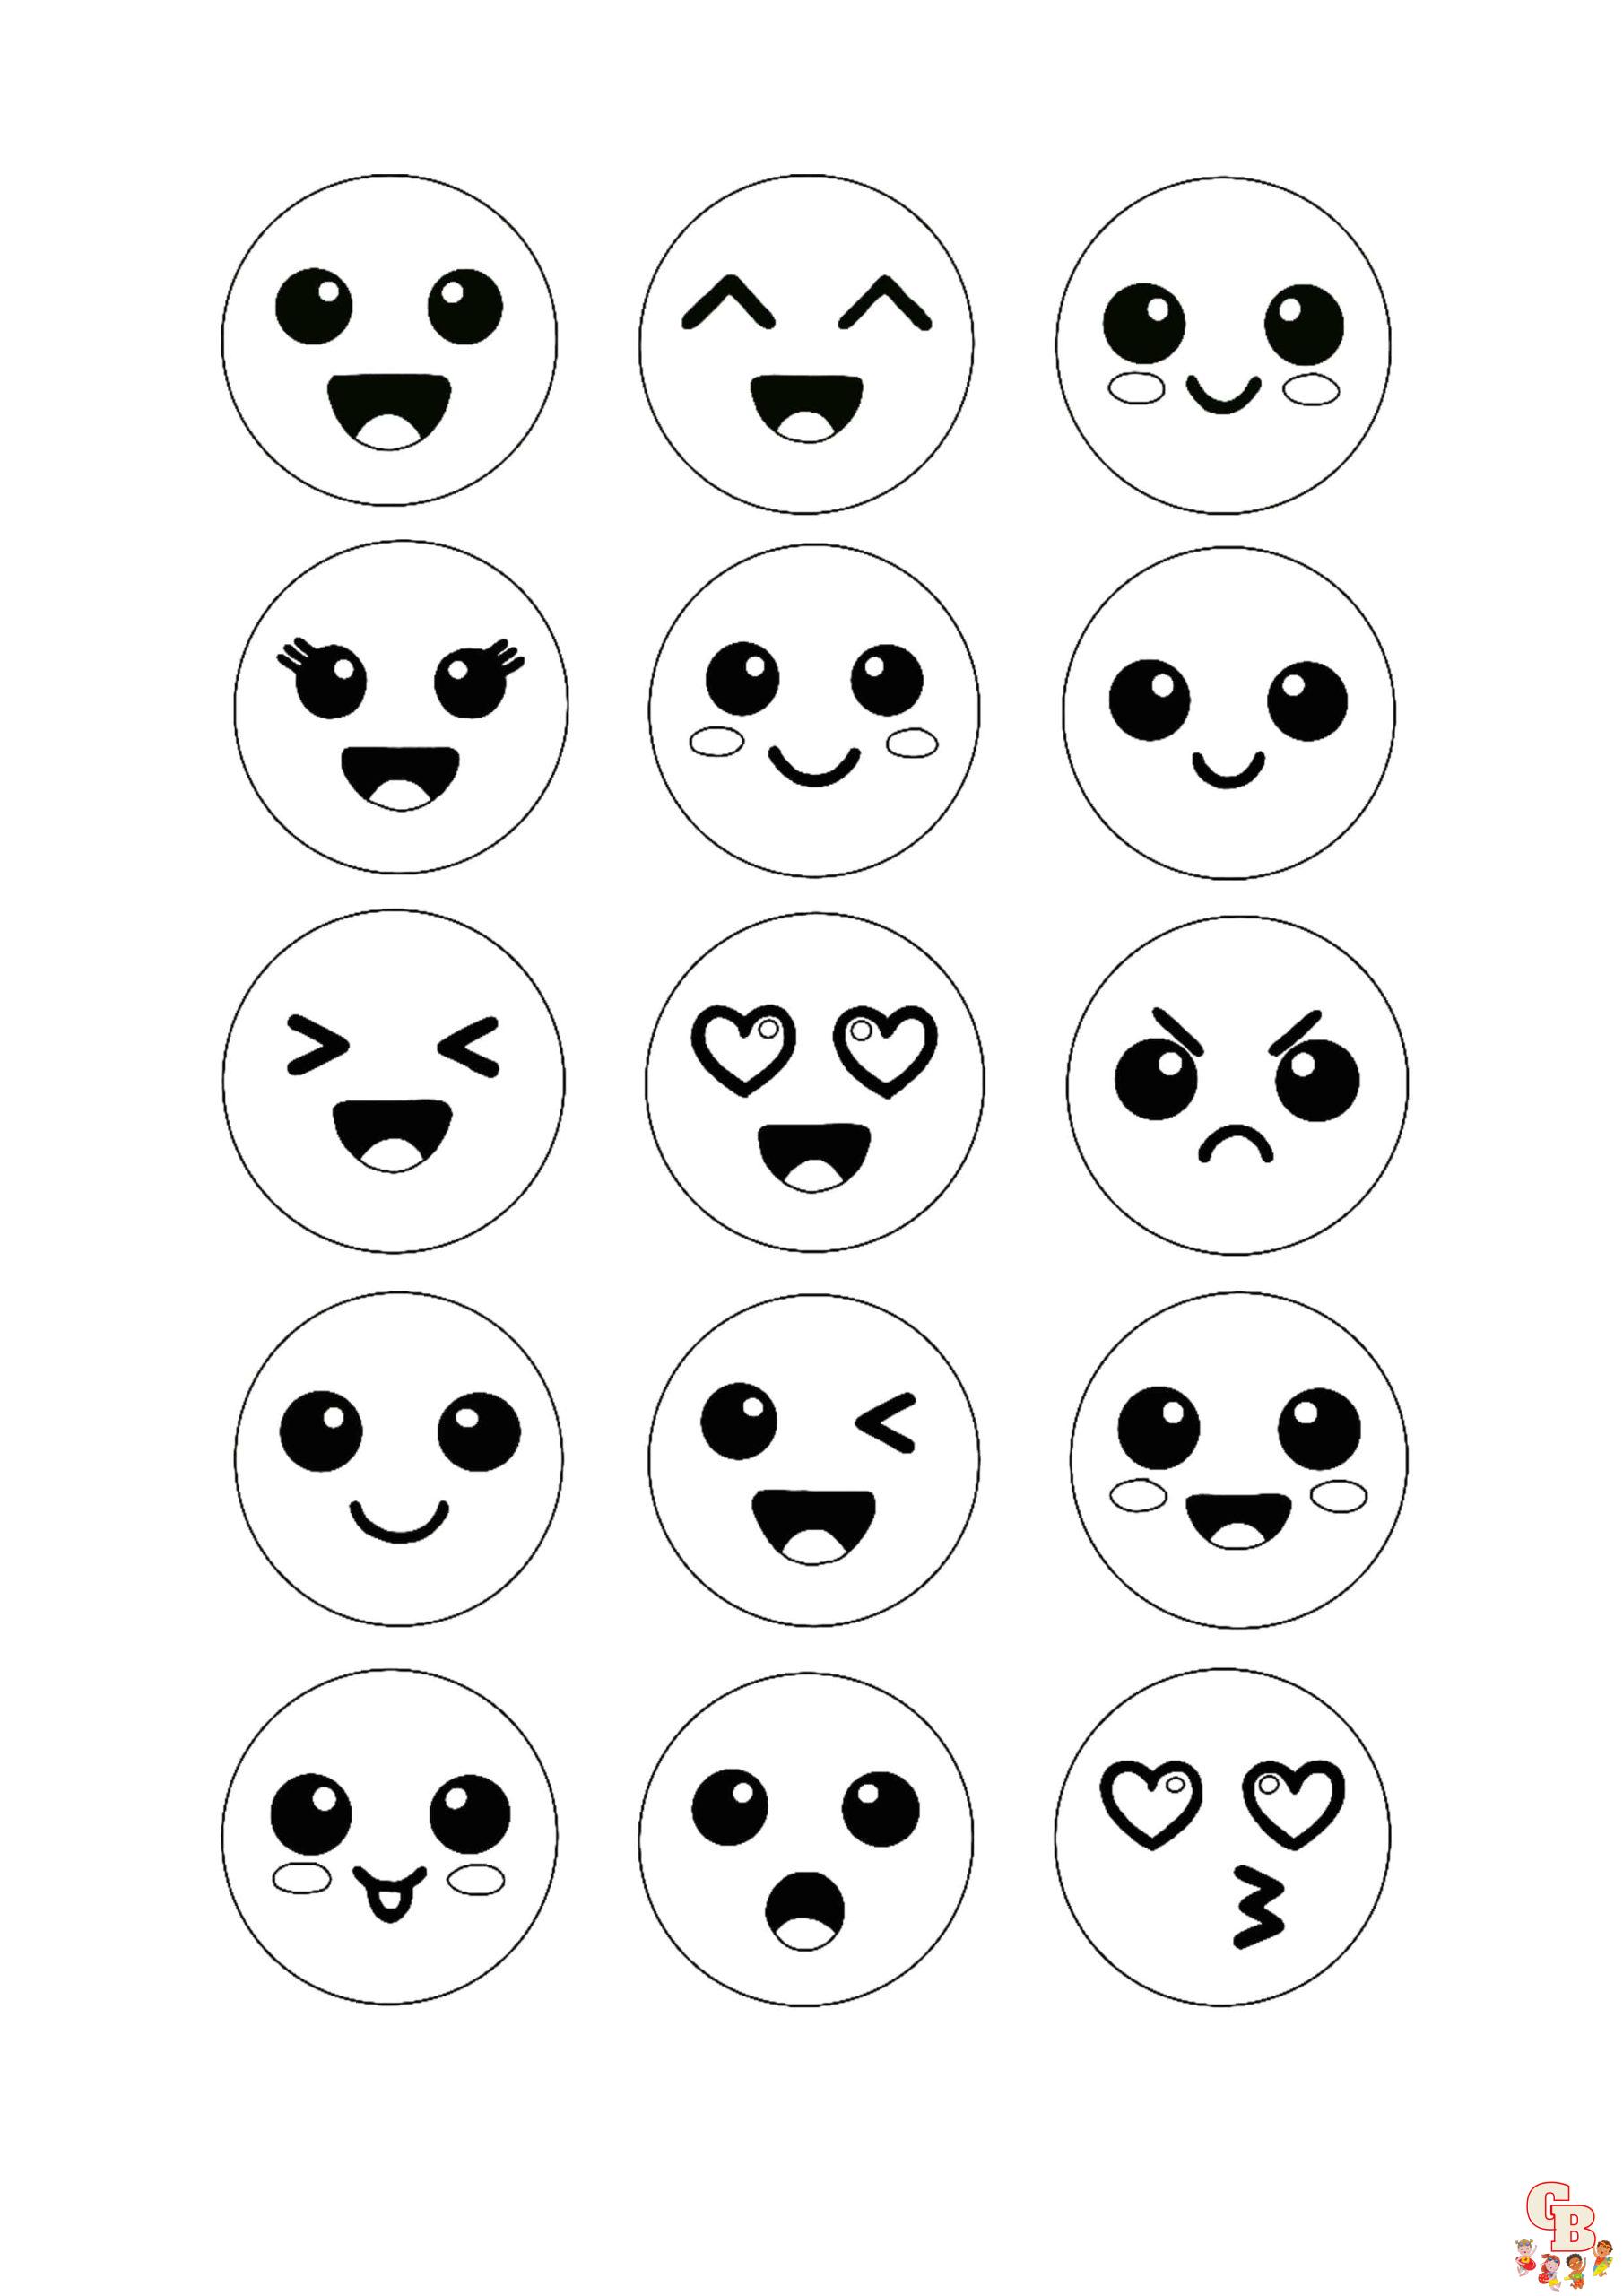 Get creative with free printable emoji coloring pages